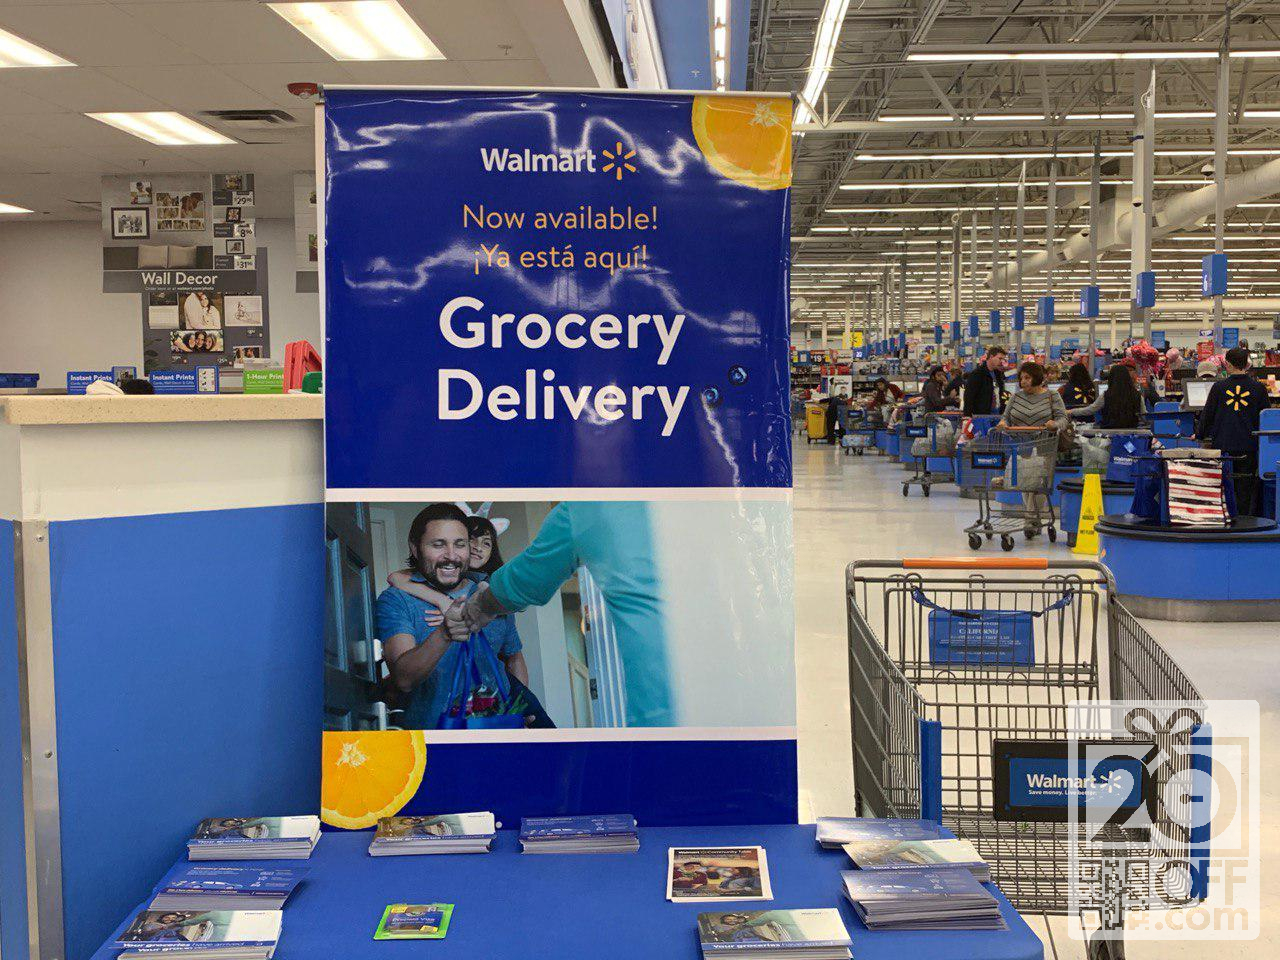 Walmart's Grocery Delivery